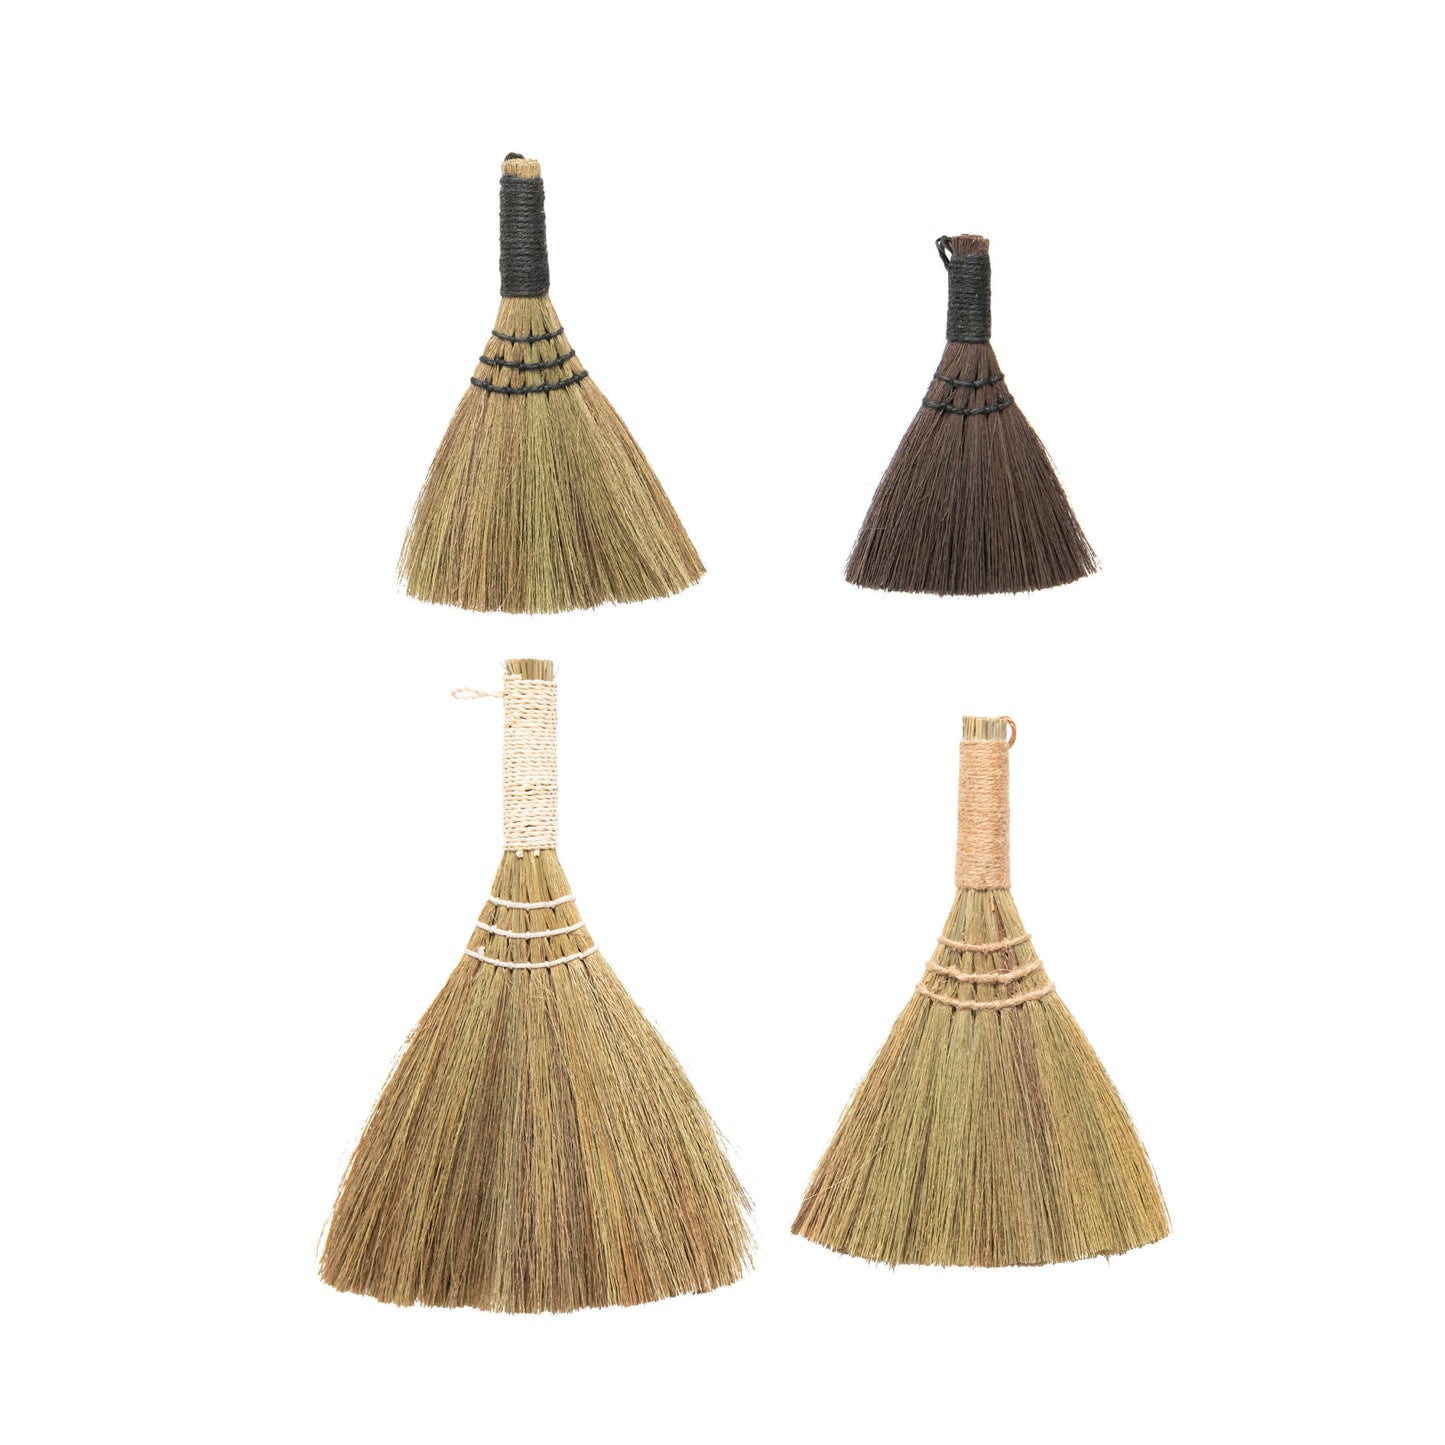 Whisk Brooms with Yarn Wrapped Handle